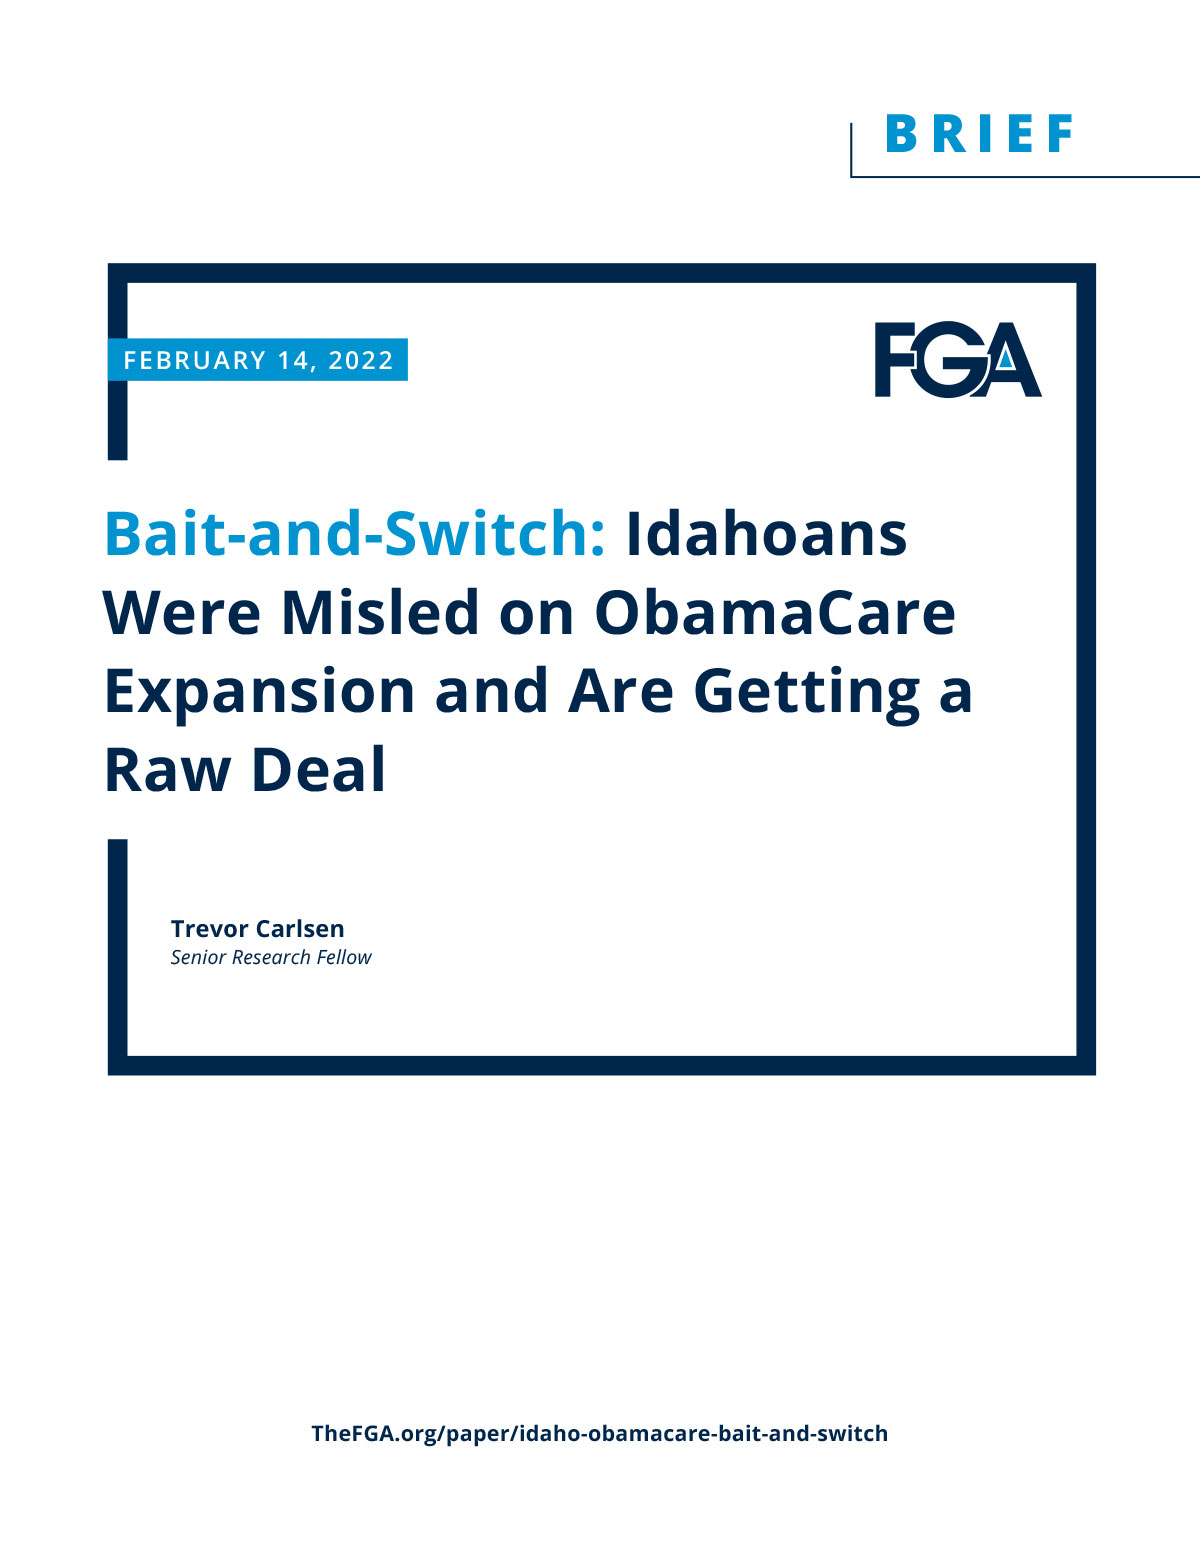 Bait-and-Switch: Idahoans Were Misled on ObamaCare Expansion and Are Getting a Raw Deal